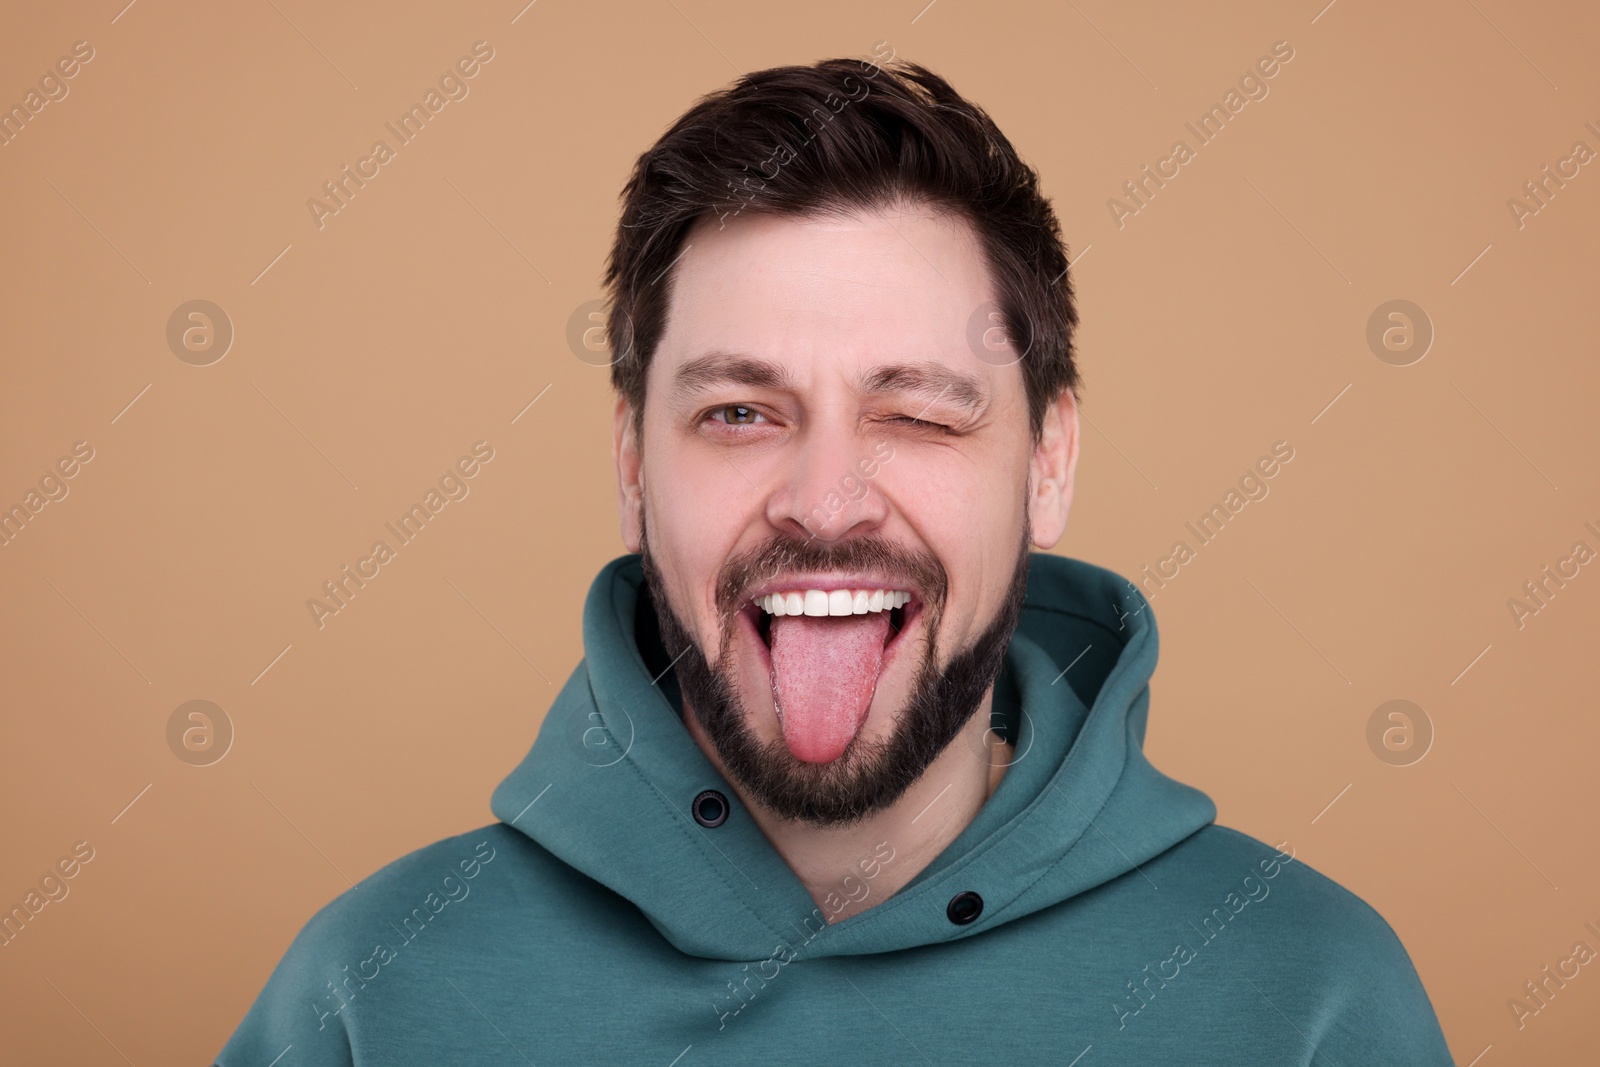 Photo of Happy man showing his tongue on beige background